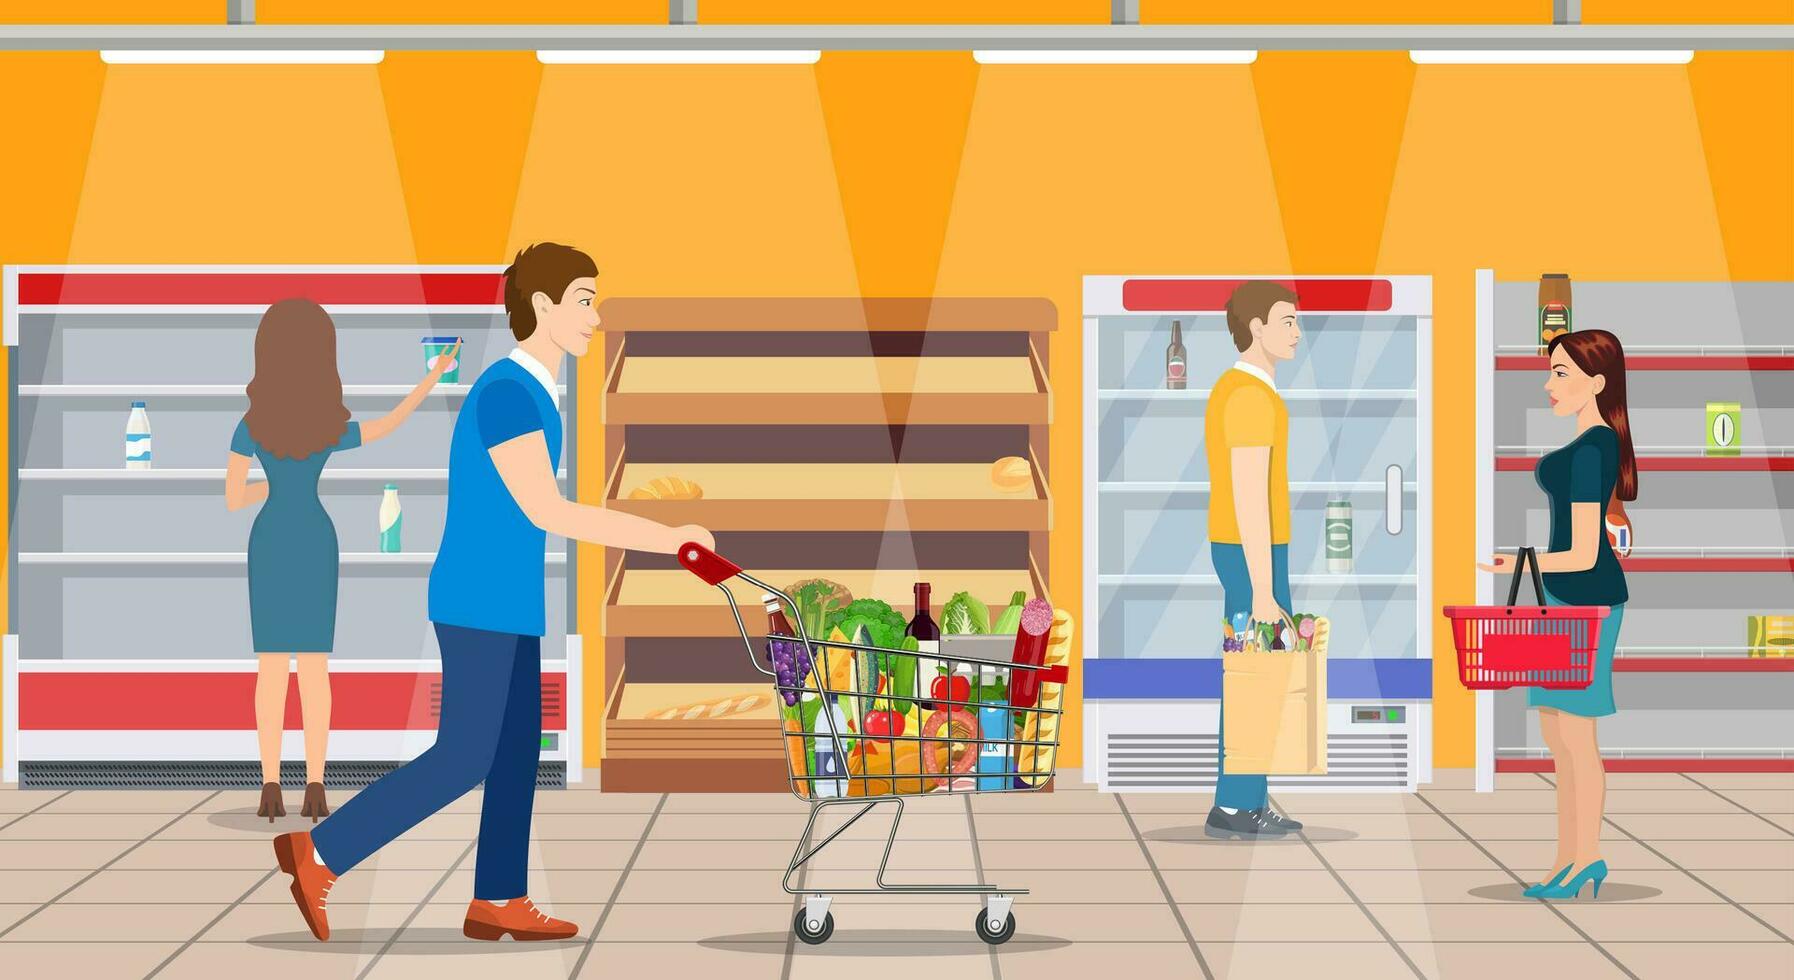 Customers people bying products in supermarket. grocery and consumerism concept. empty store shelves. Vector illustration in flat style